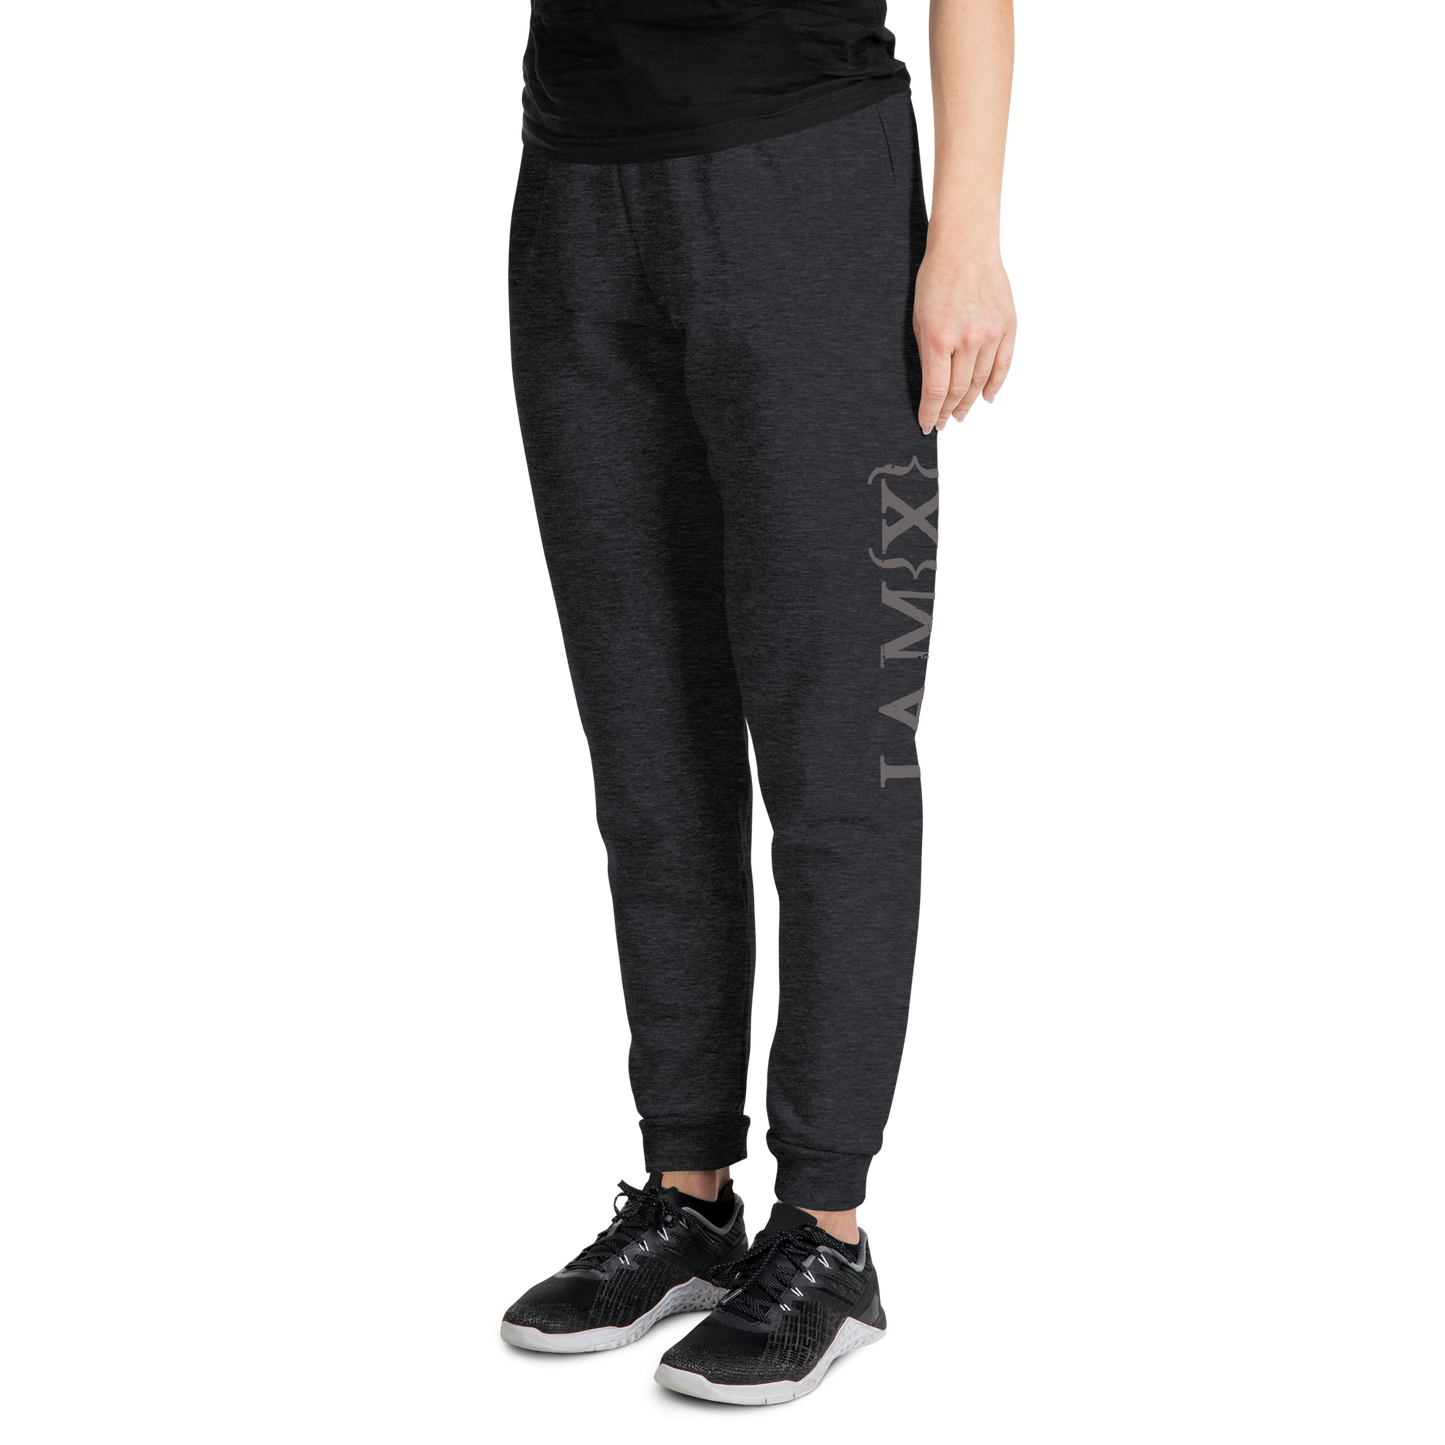 Unisex Joggers - "We Are One in the Unified Field"